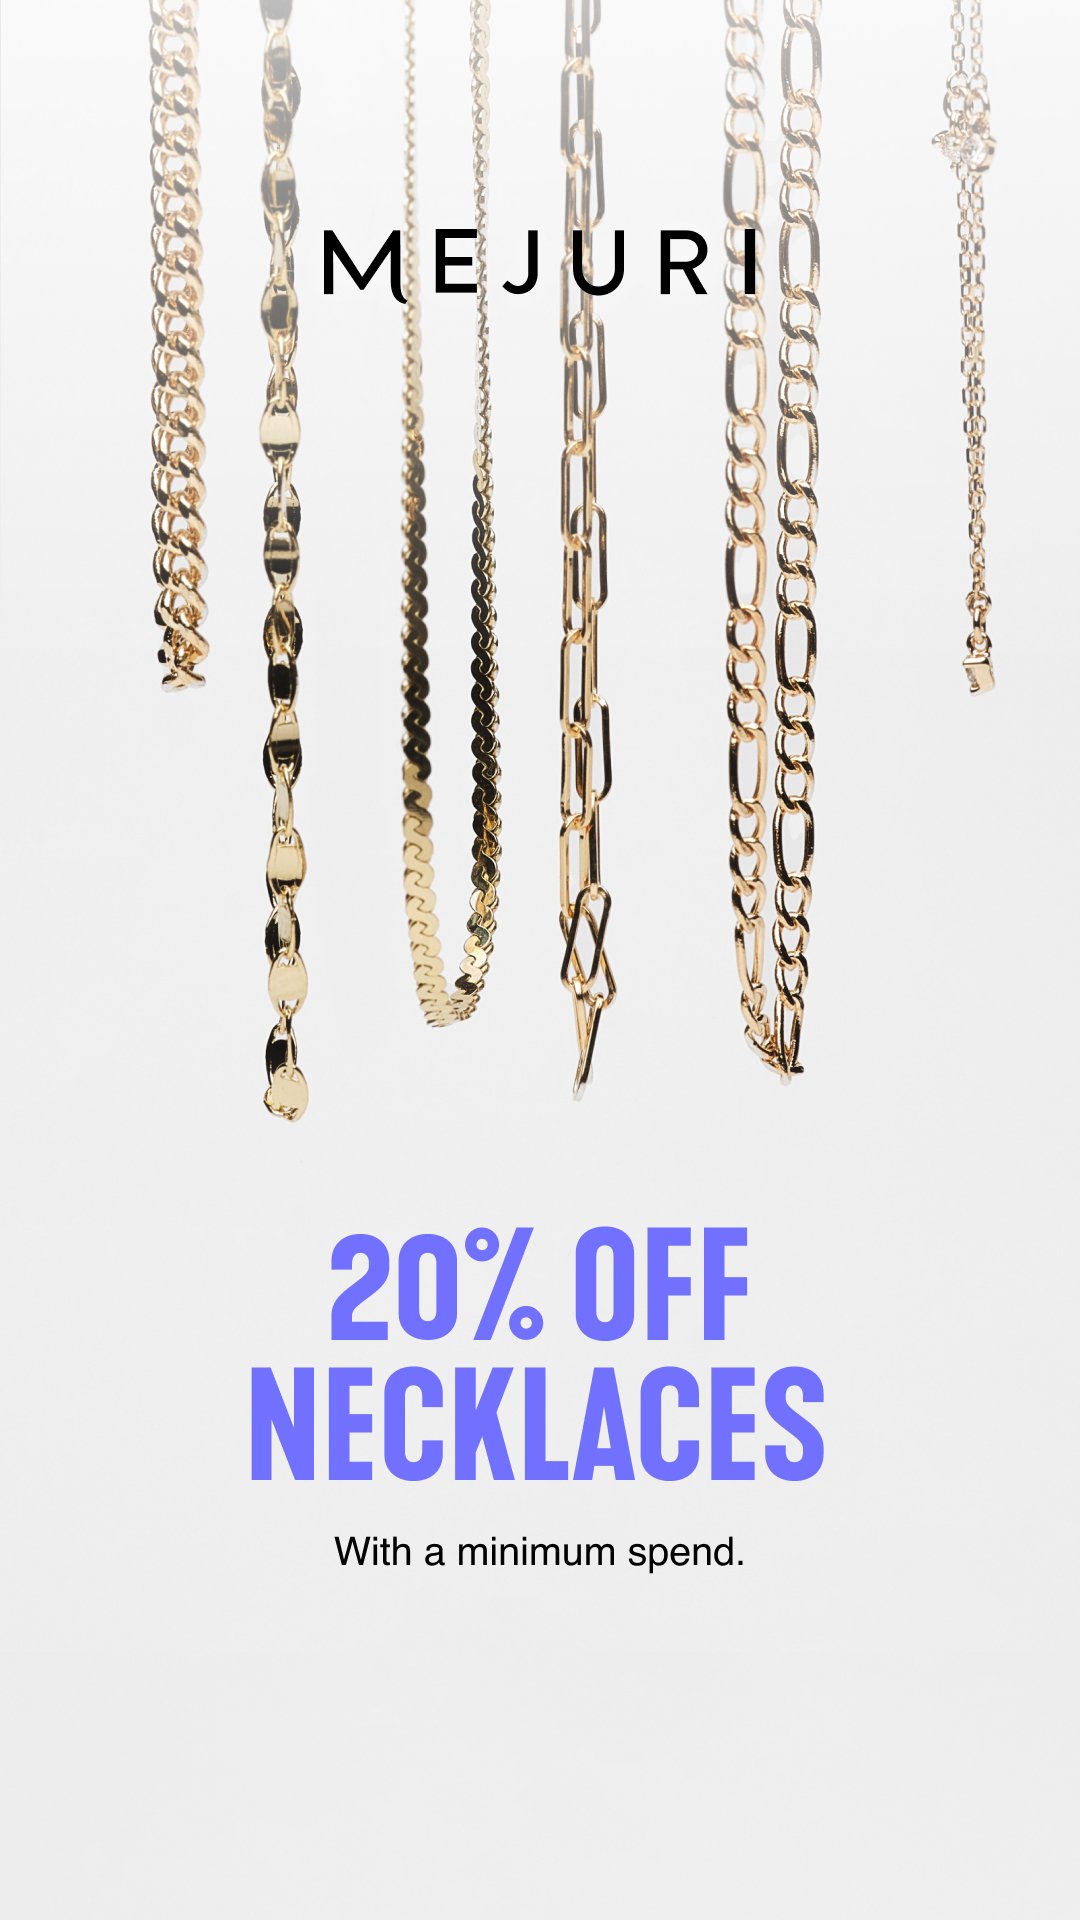 2_Story_20%OffNecklaces.jpg